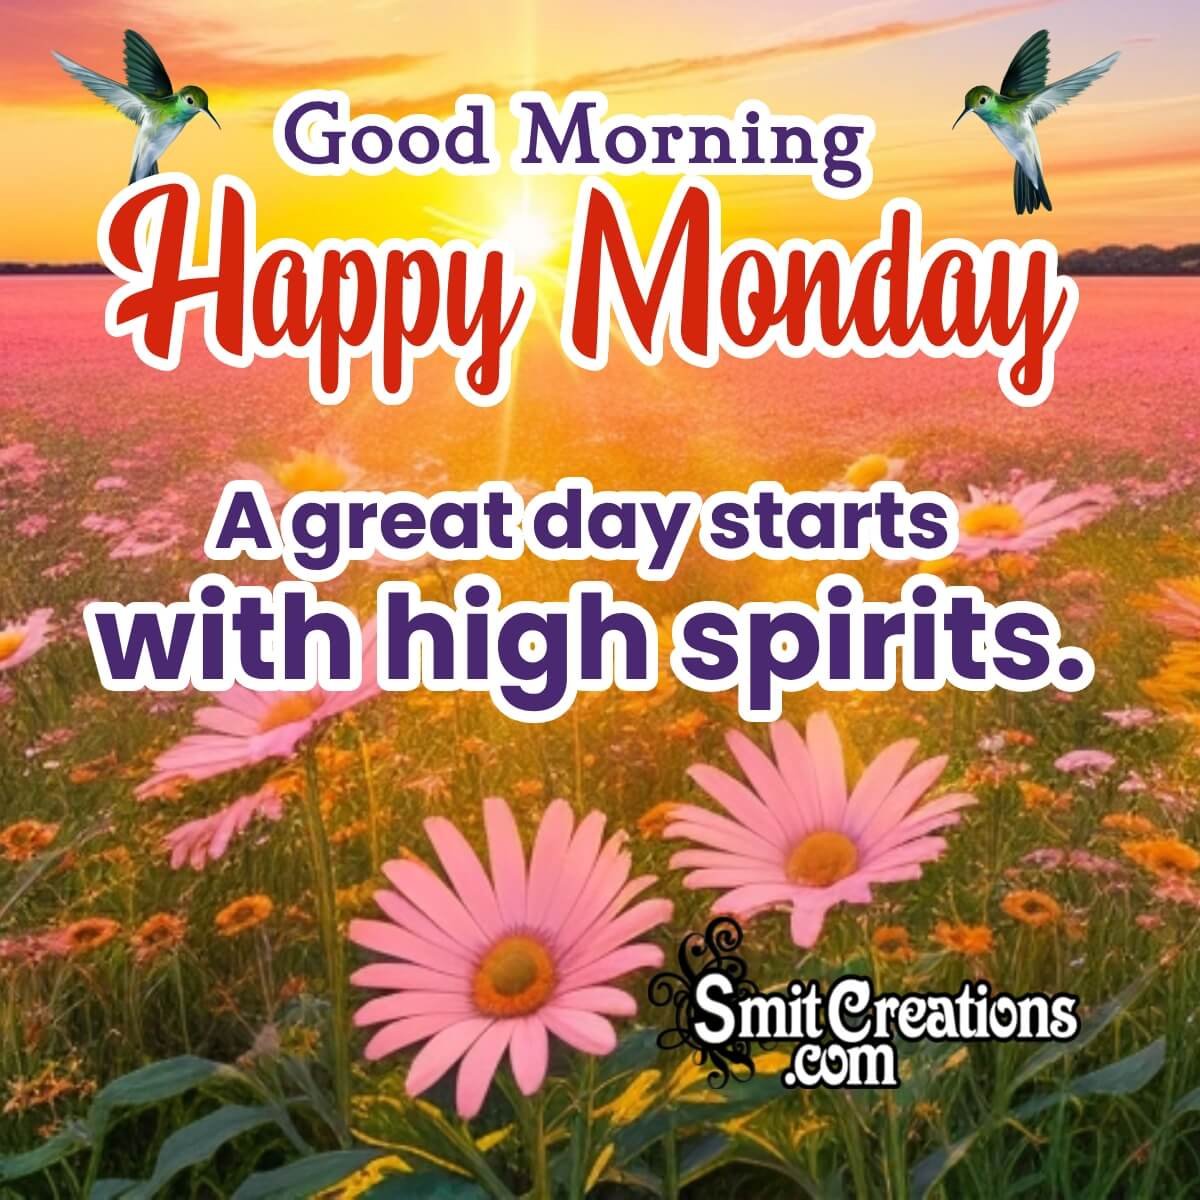 44 Good Morning Happy Monday Images - Smit Creations – Your Daily Dose ...